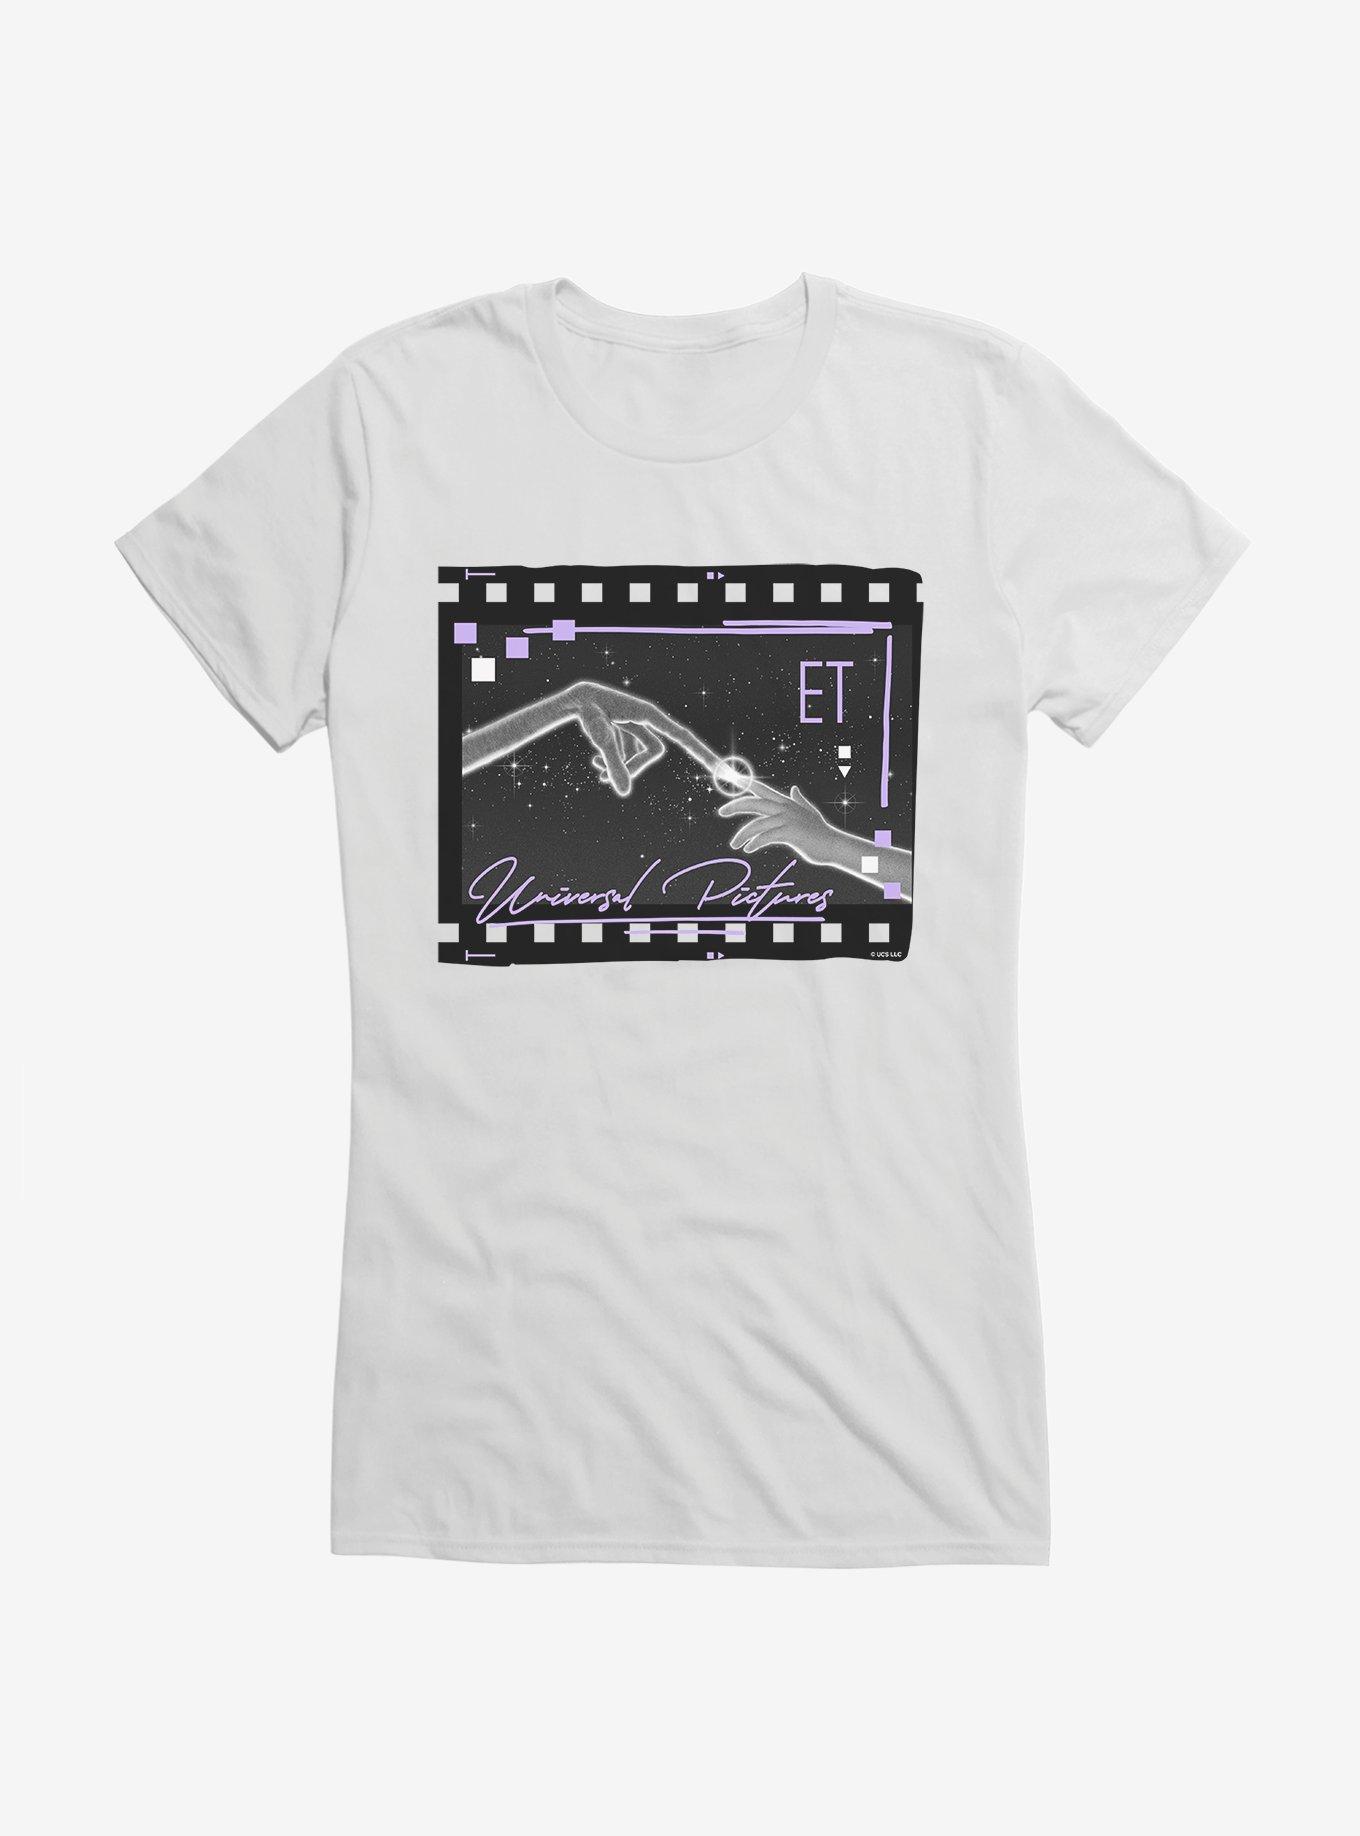 E.T. Universal Pictures Presents Girls T-Shirt, WHITE, hi-res